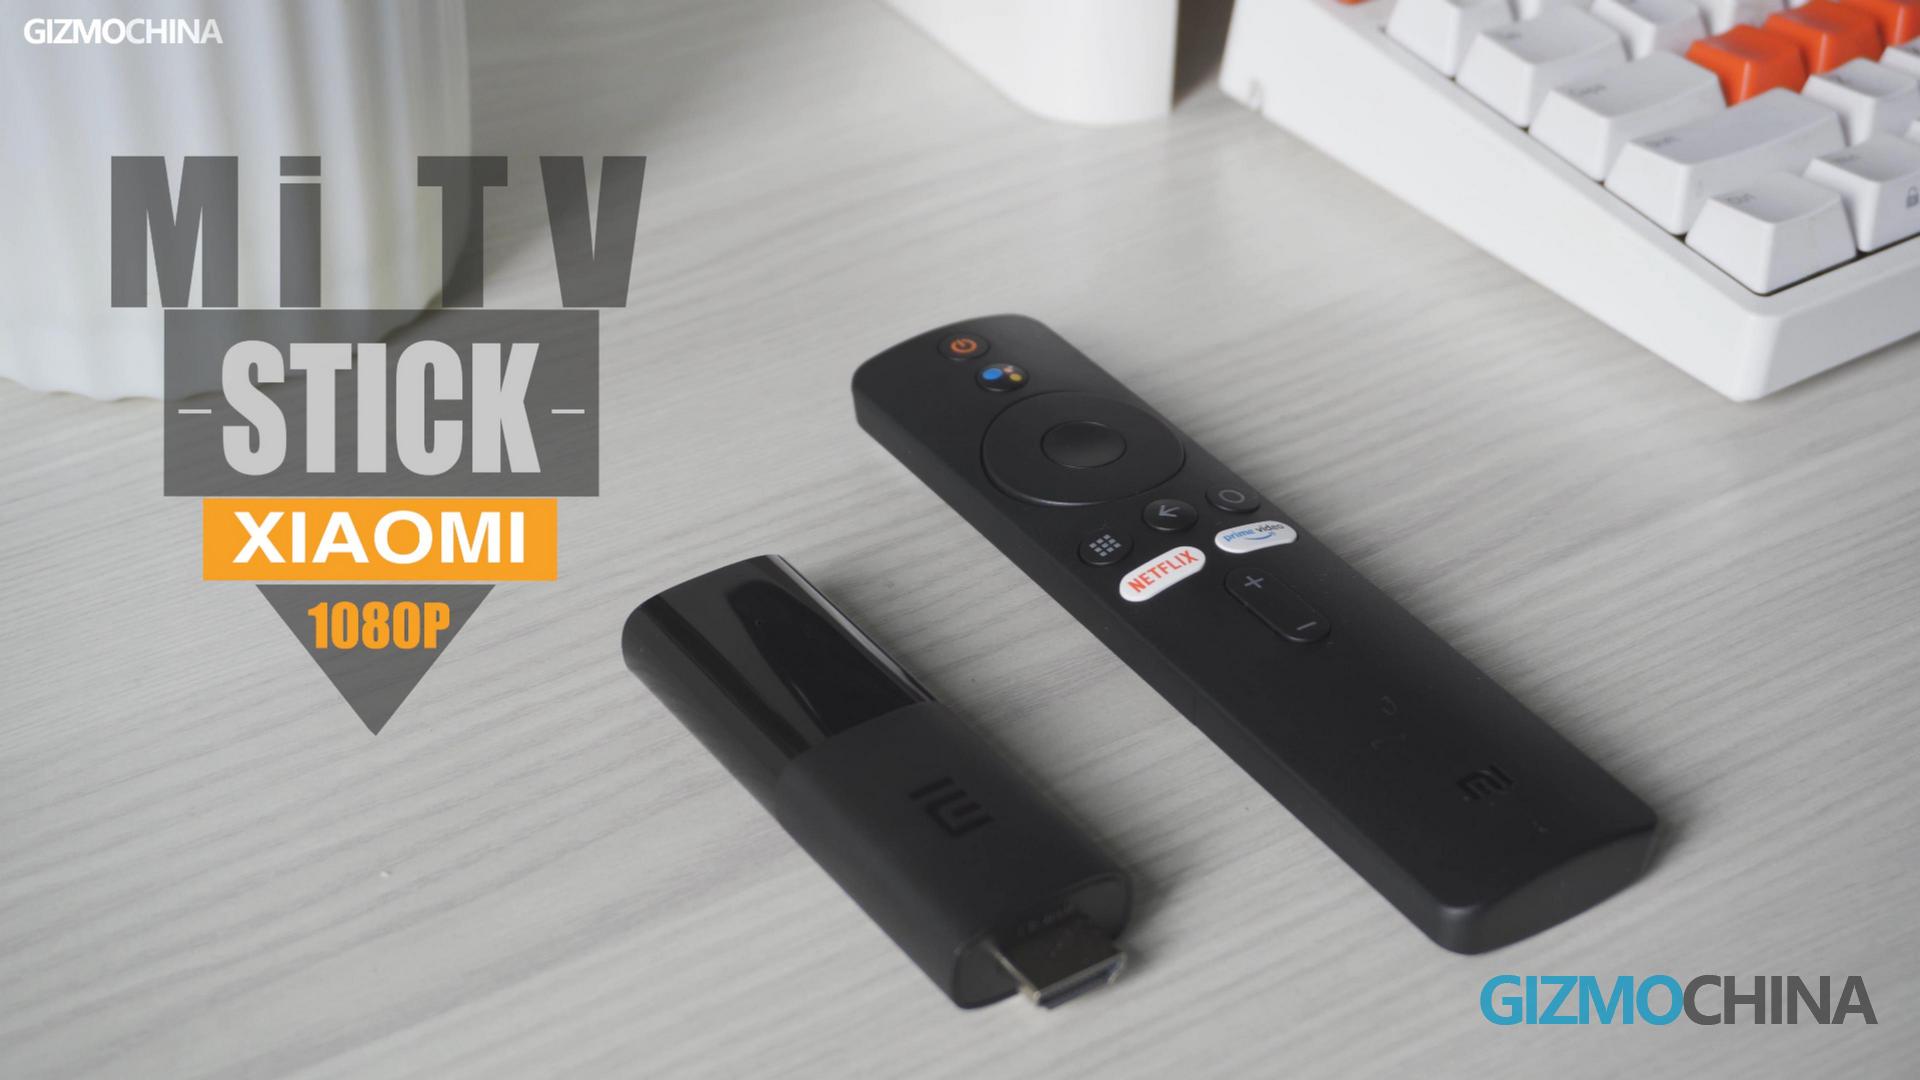 Xiaomi Mi TV Stick Review - Give Your Aging TV Some Stick - Stuff